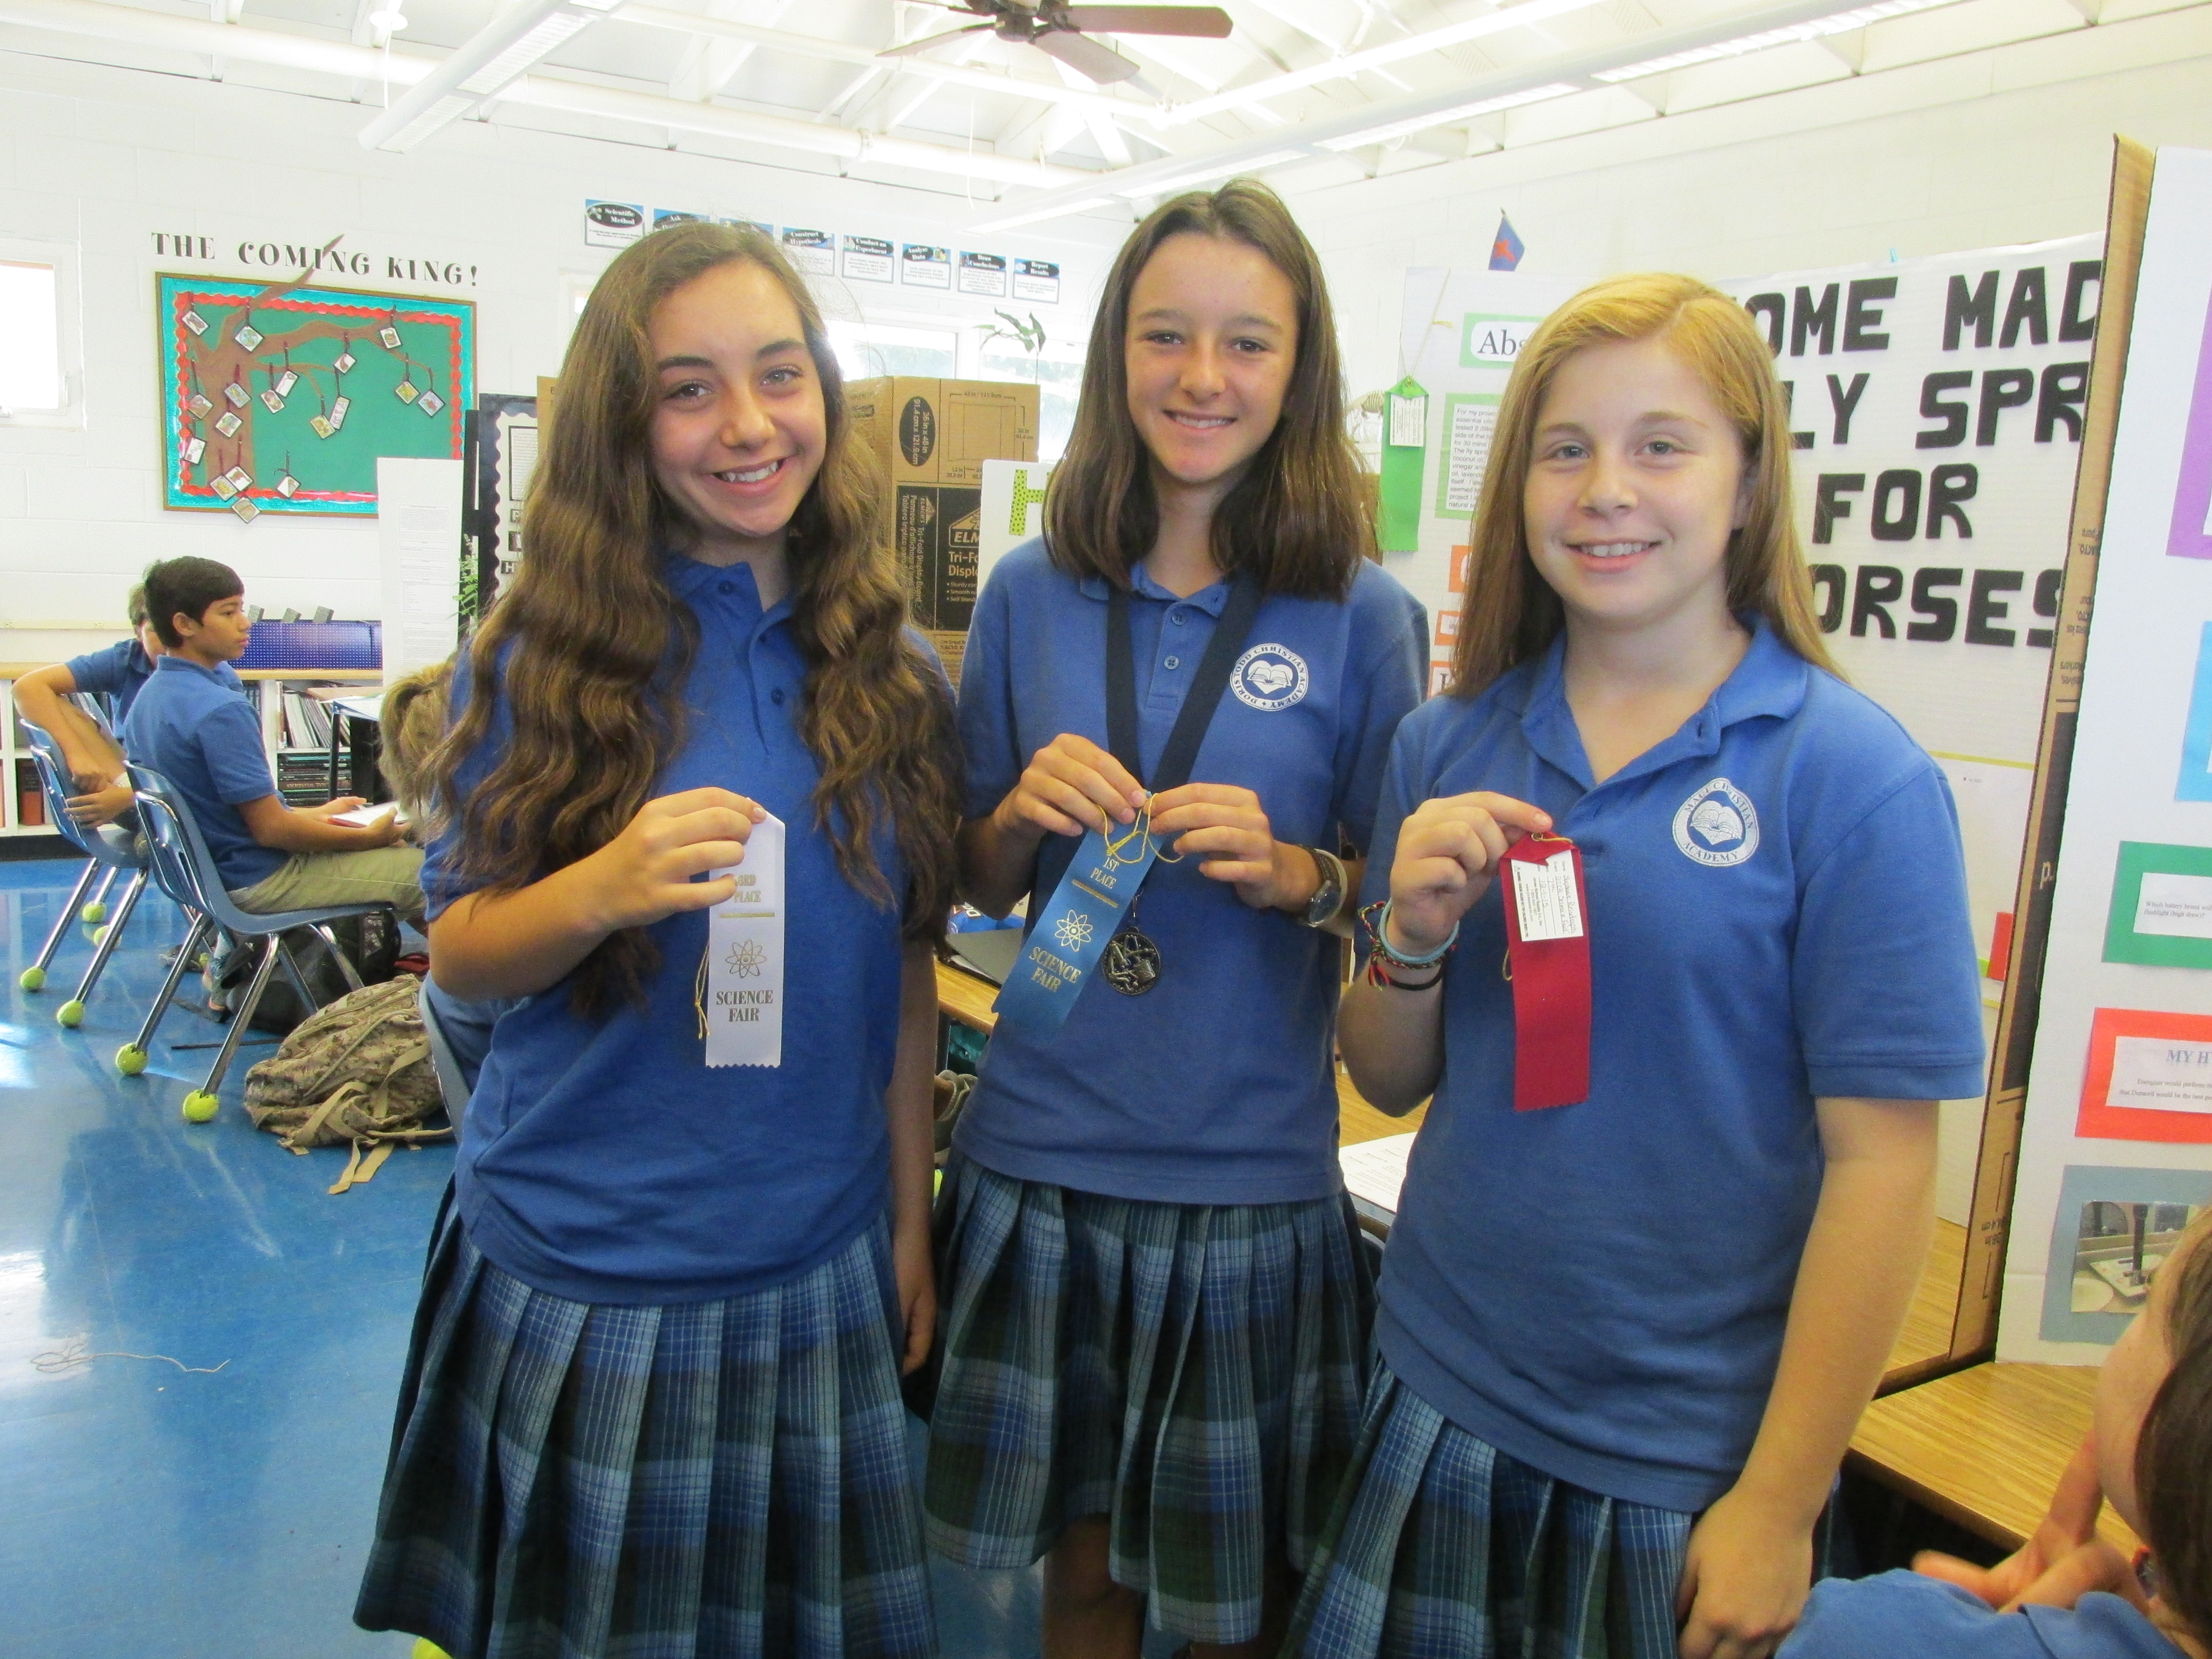 Doris Todd Science Fair seventh grade winners (left to right): Natalie Boody, second place; Keala Bouwens, first place and grand champion; and Stephanie Reisdorph, third place.